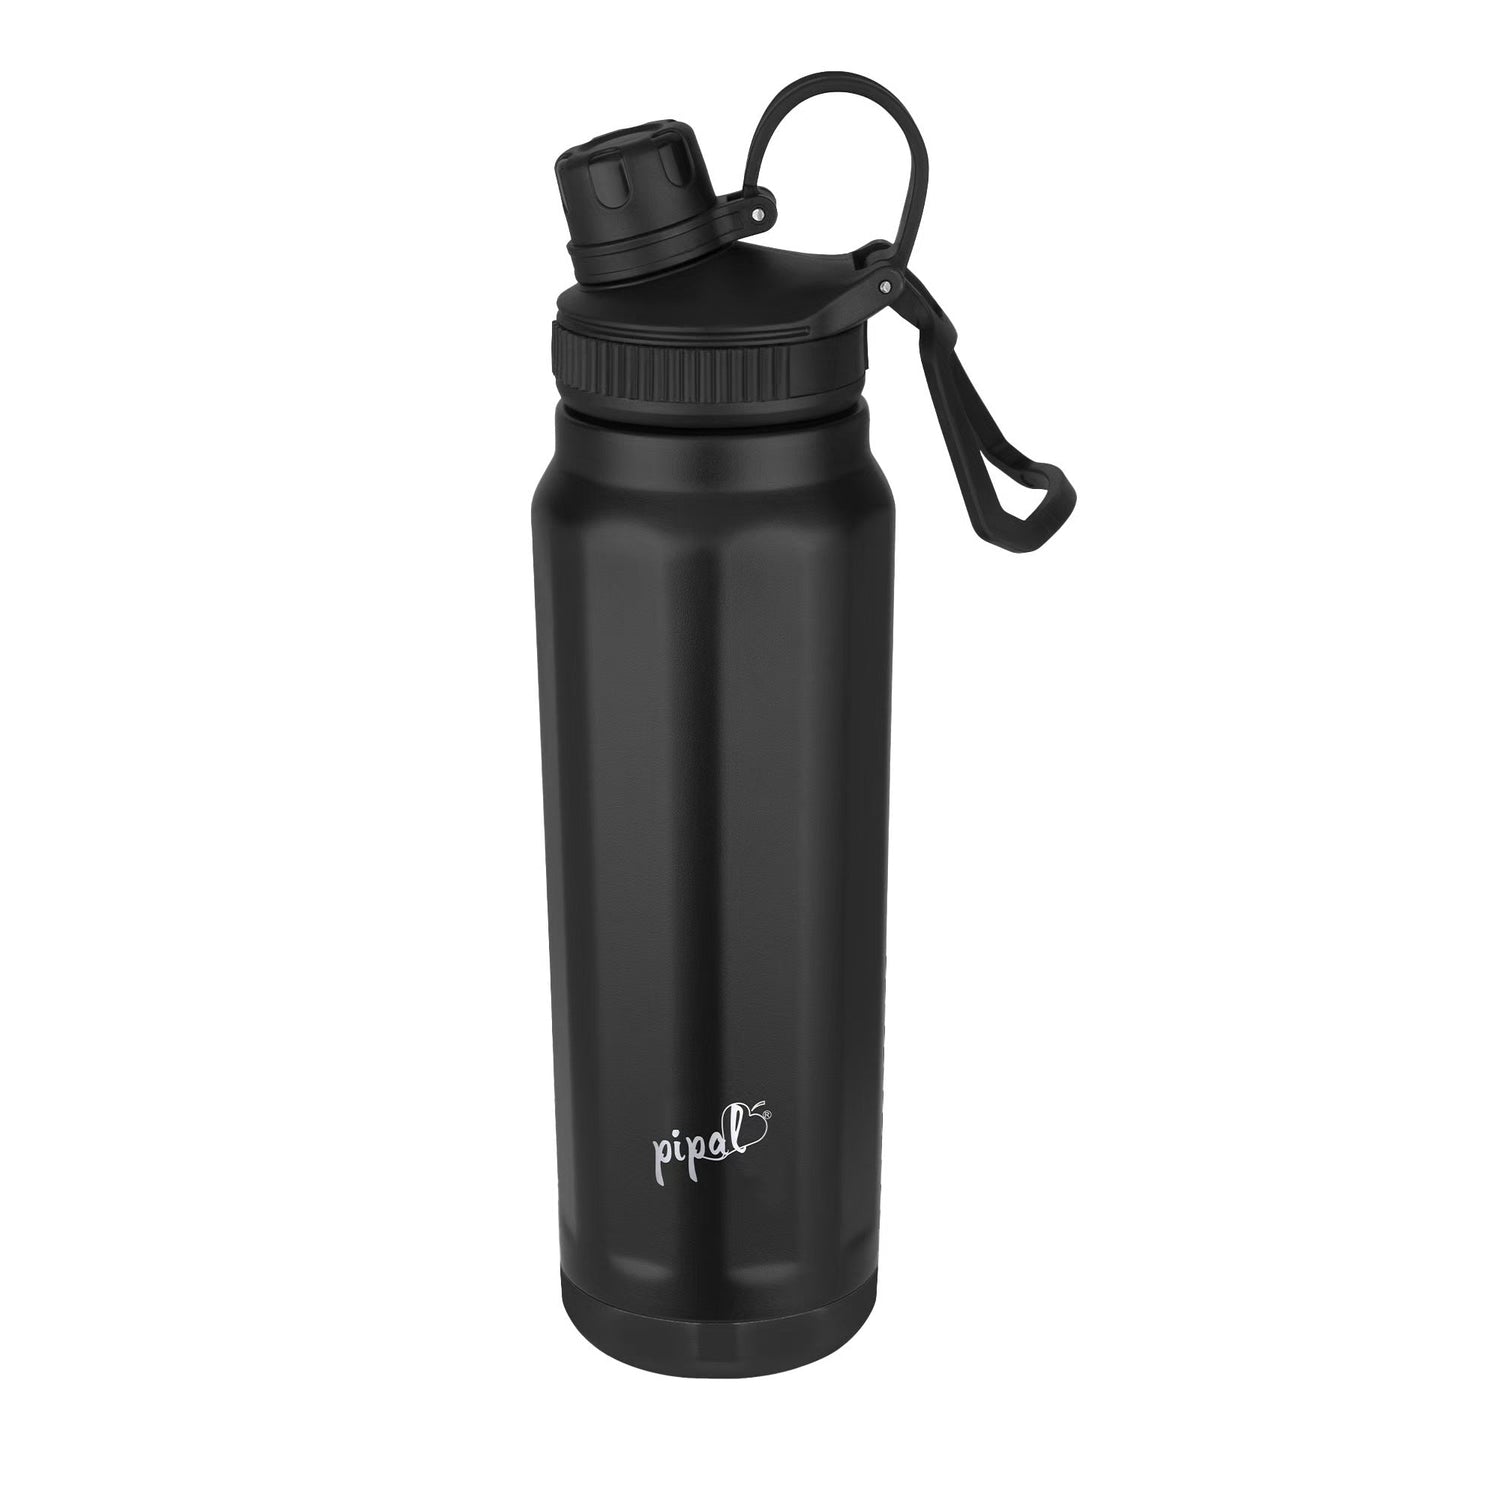 Pipal Aquamarine Insulated Water Bottle